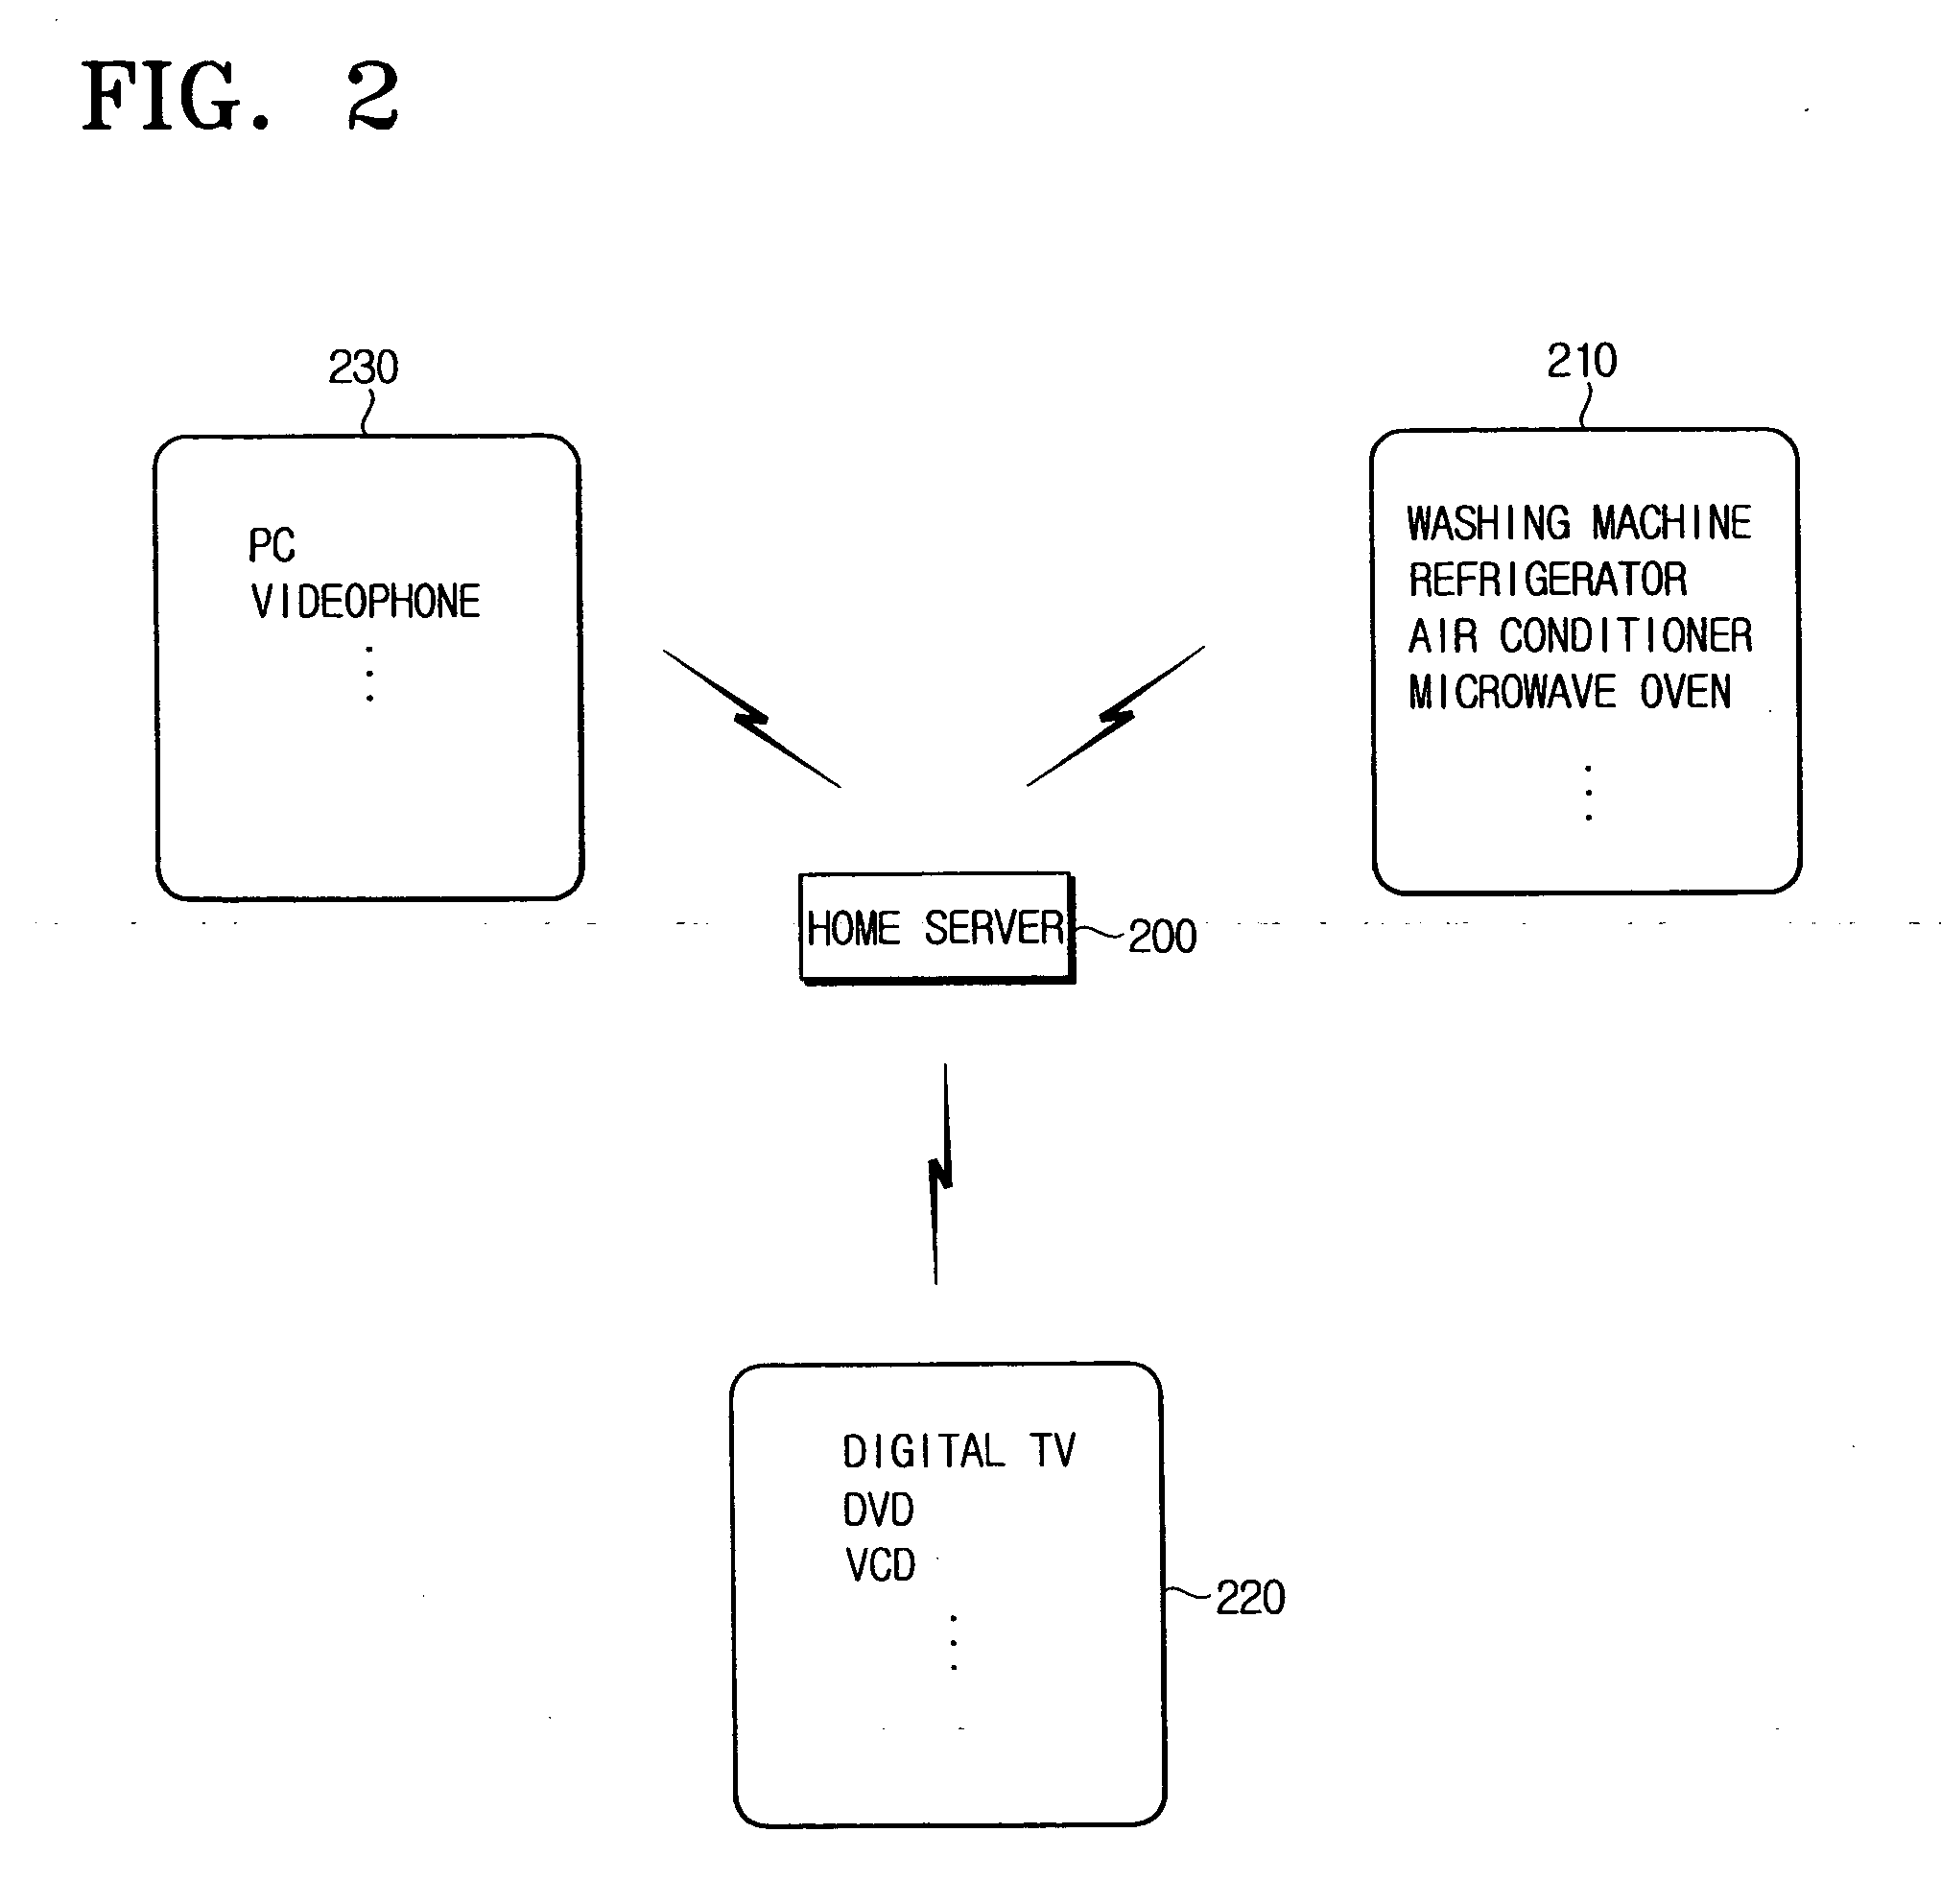 Authentication apparatus and method for home network devices